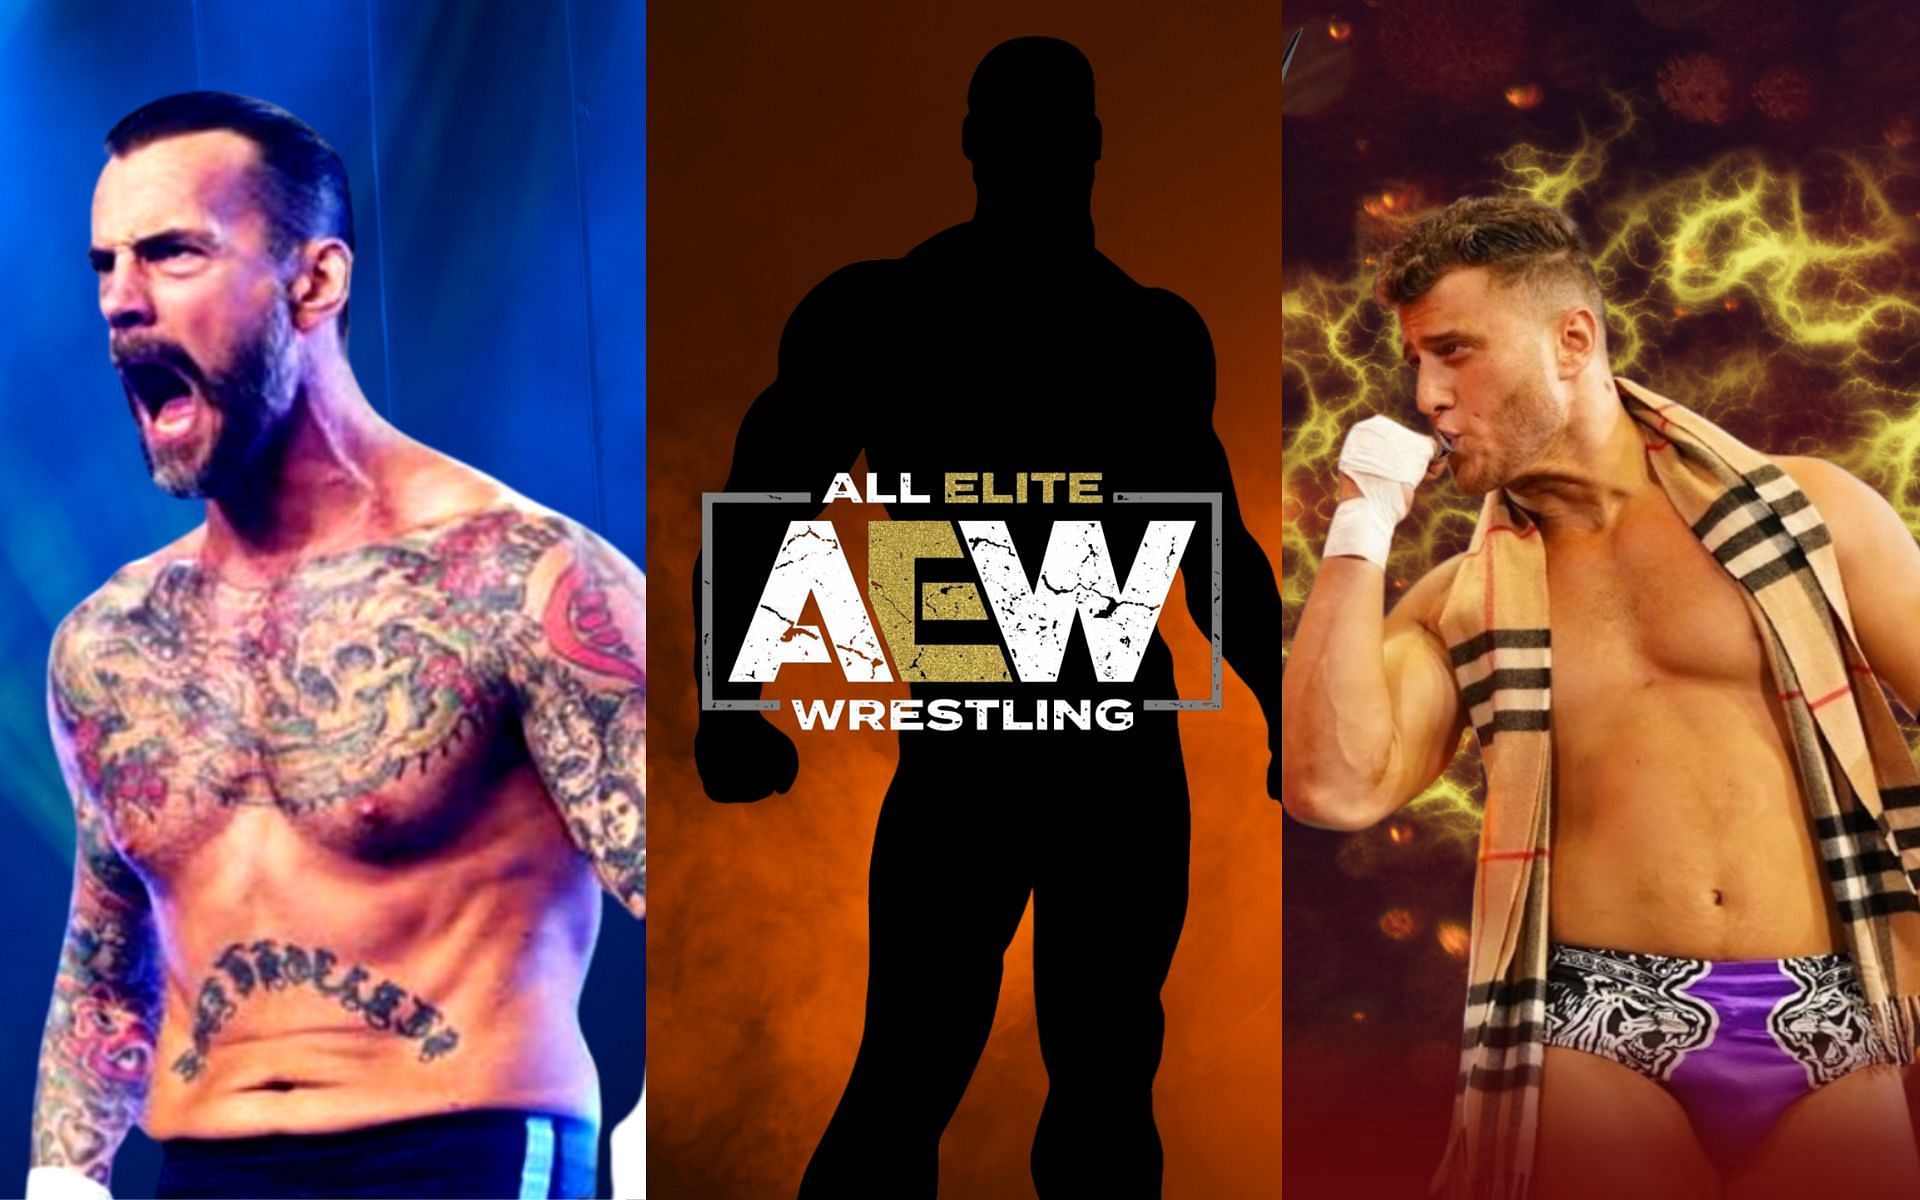 MJF has been involved in varied feuds with multiple superstars on AEW